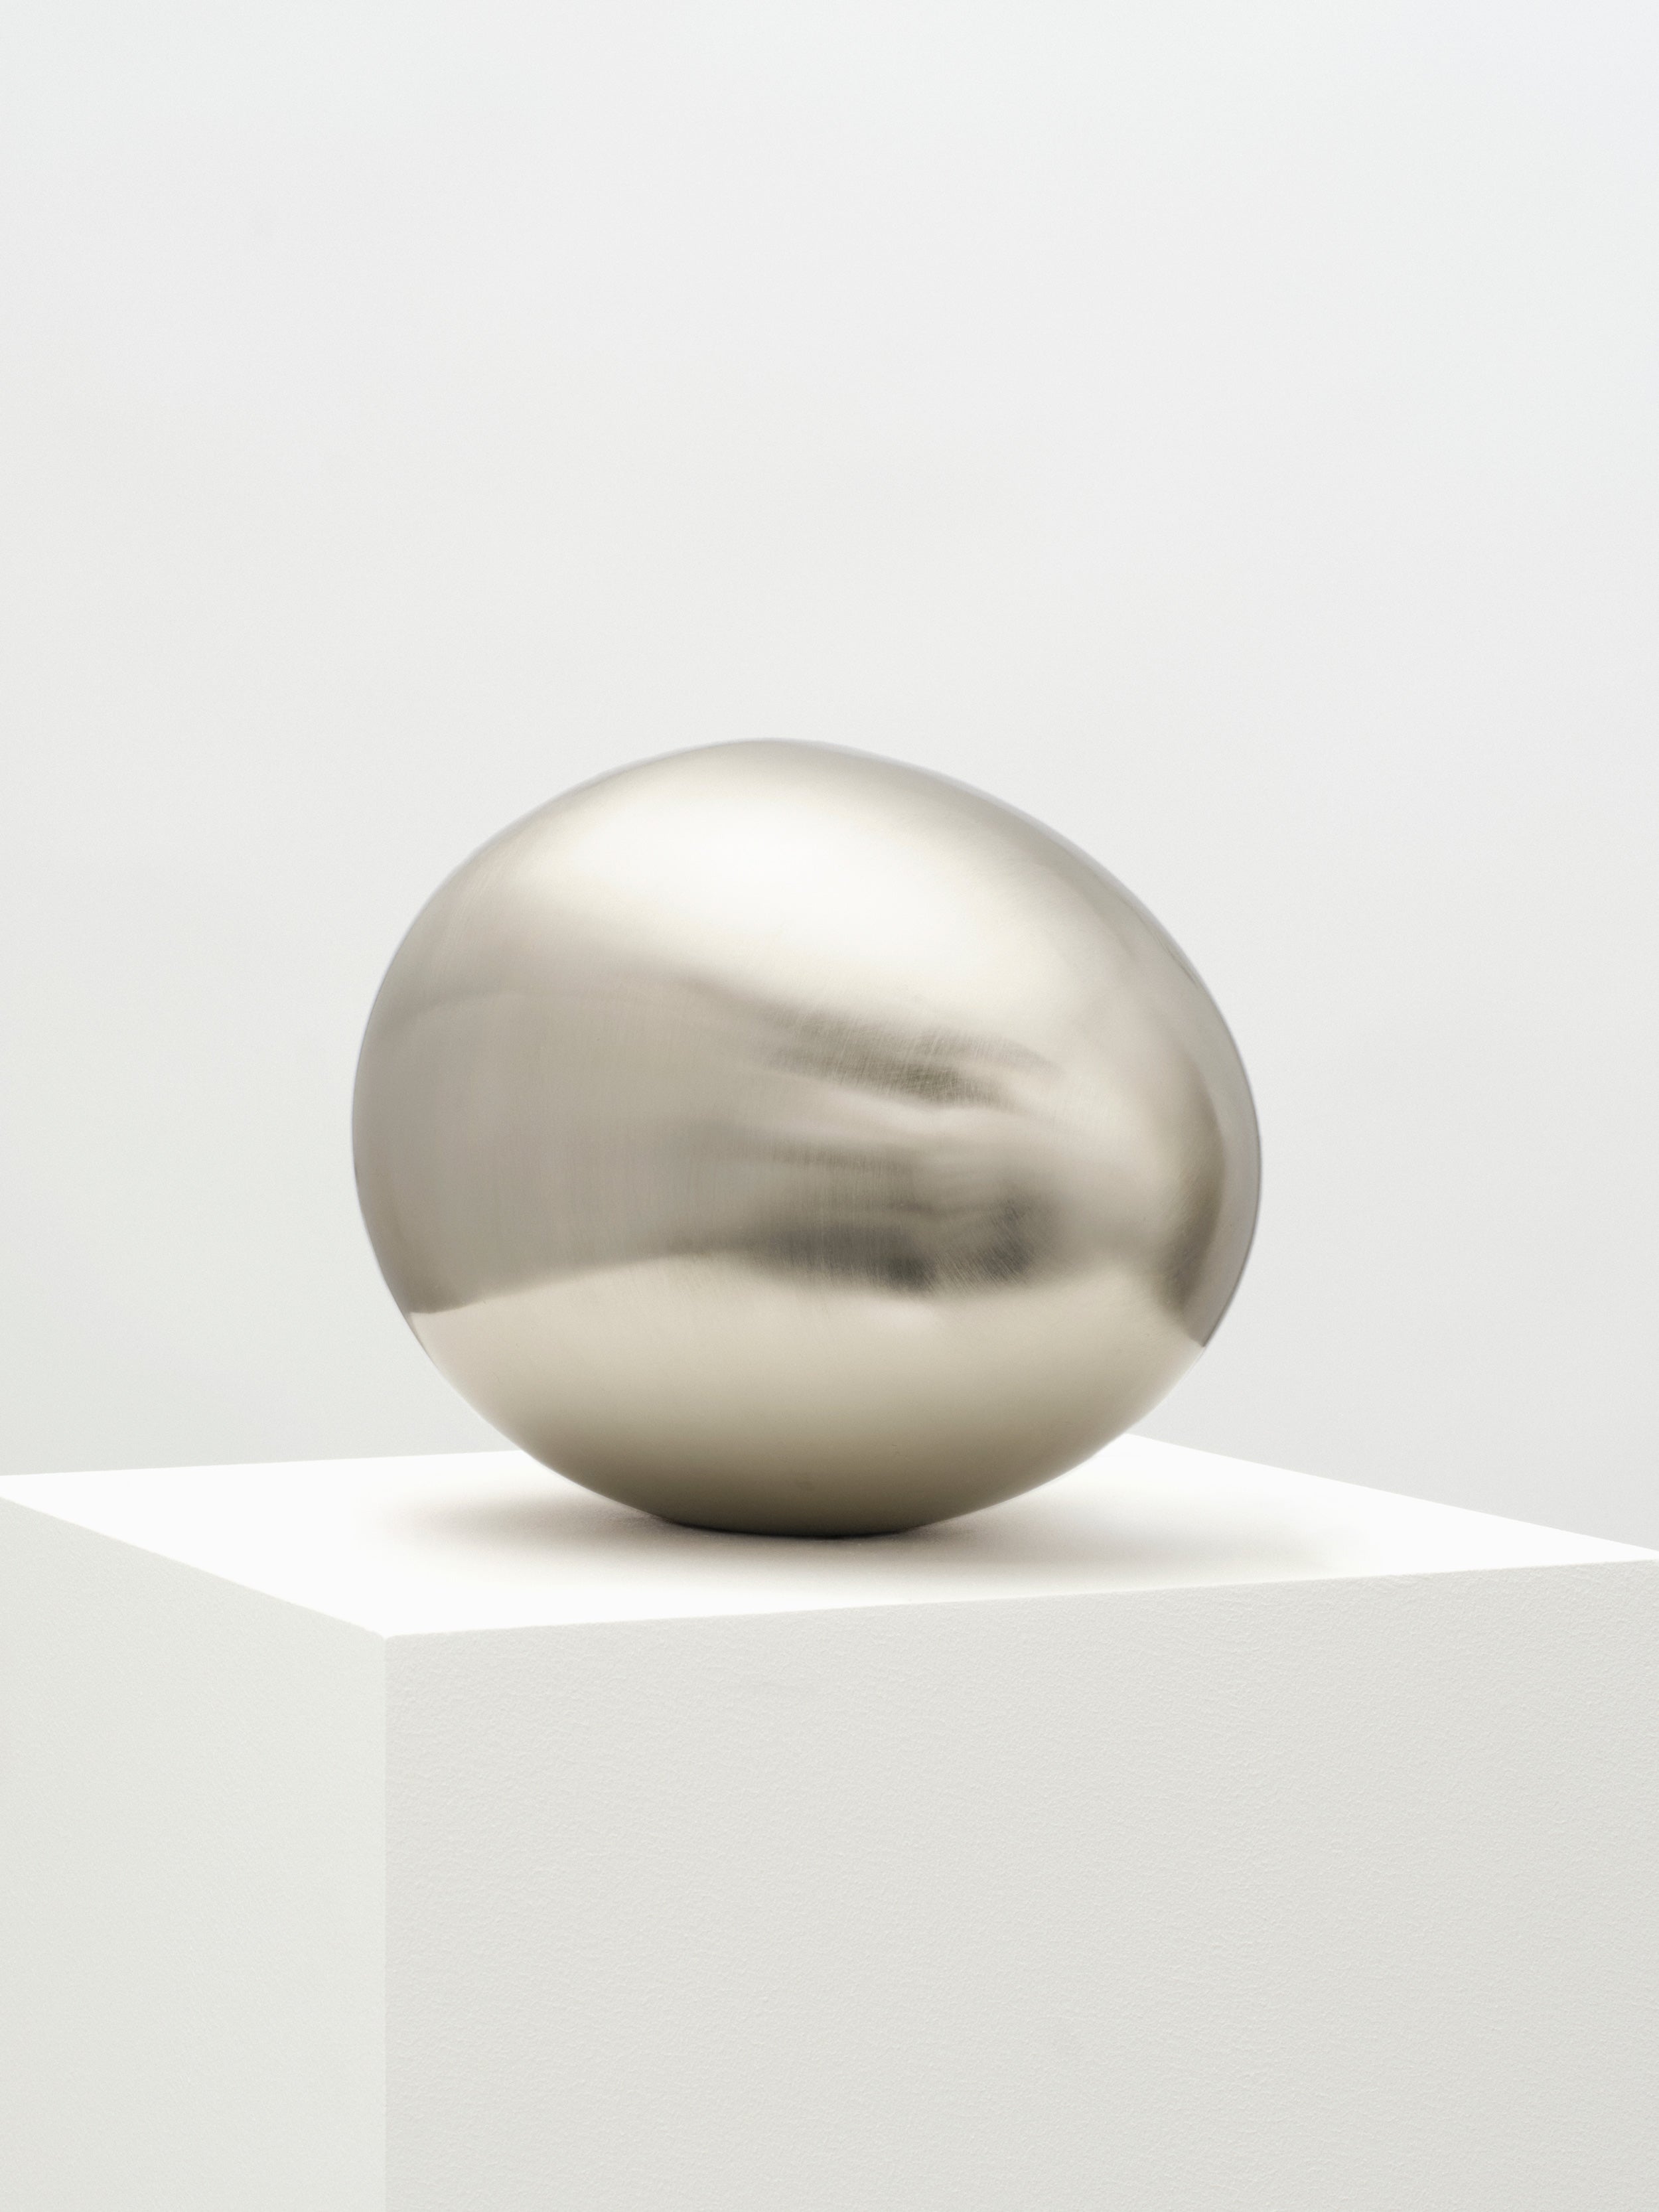 Contemporary Art Piece of Egg Sculpture made of Brushed Steel